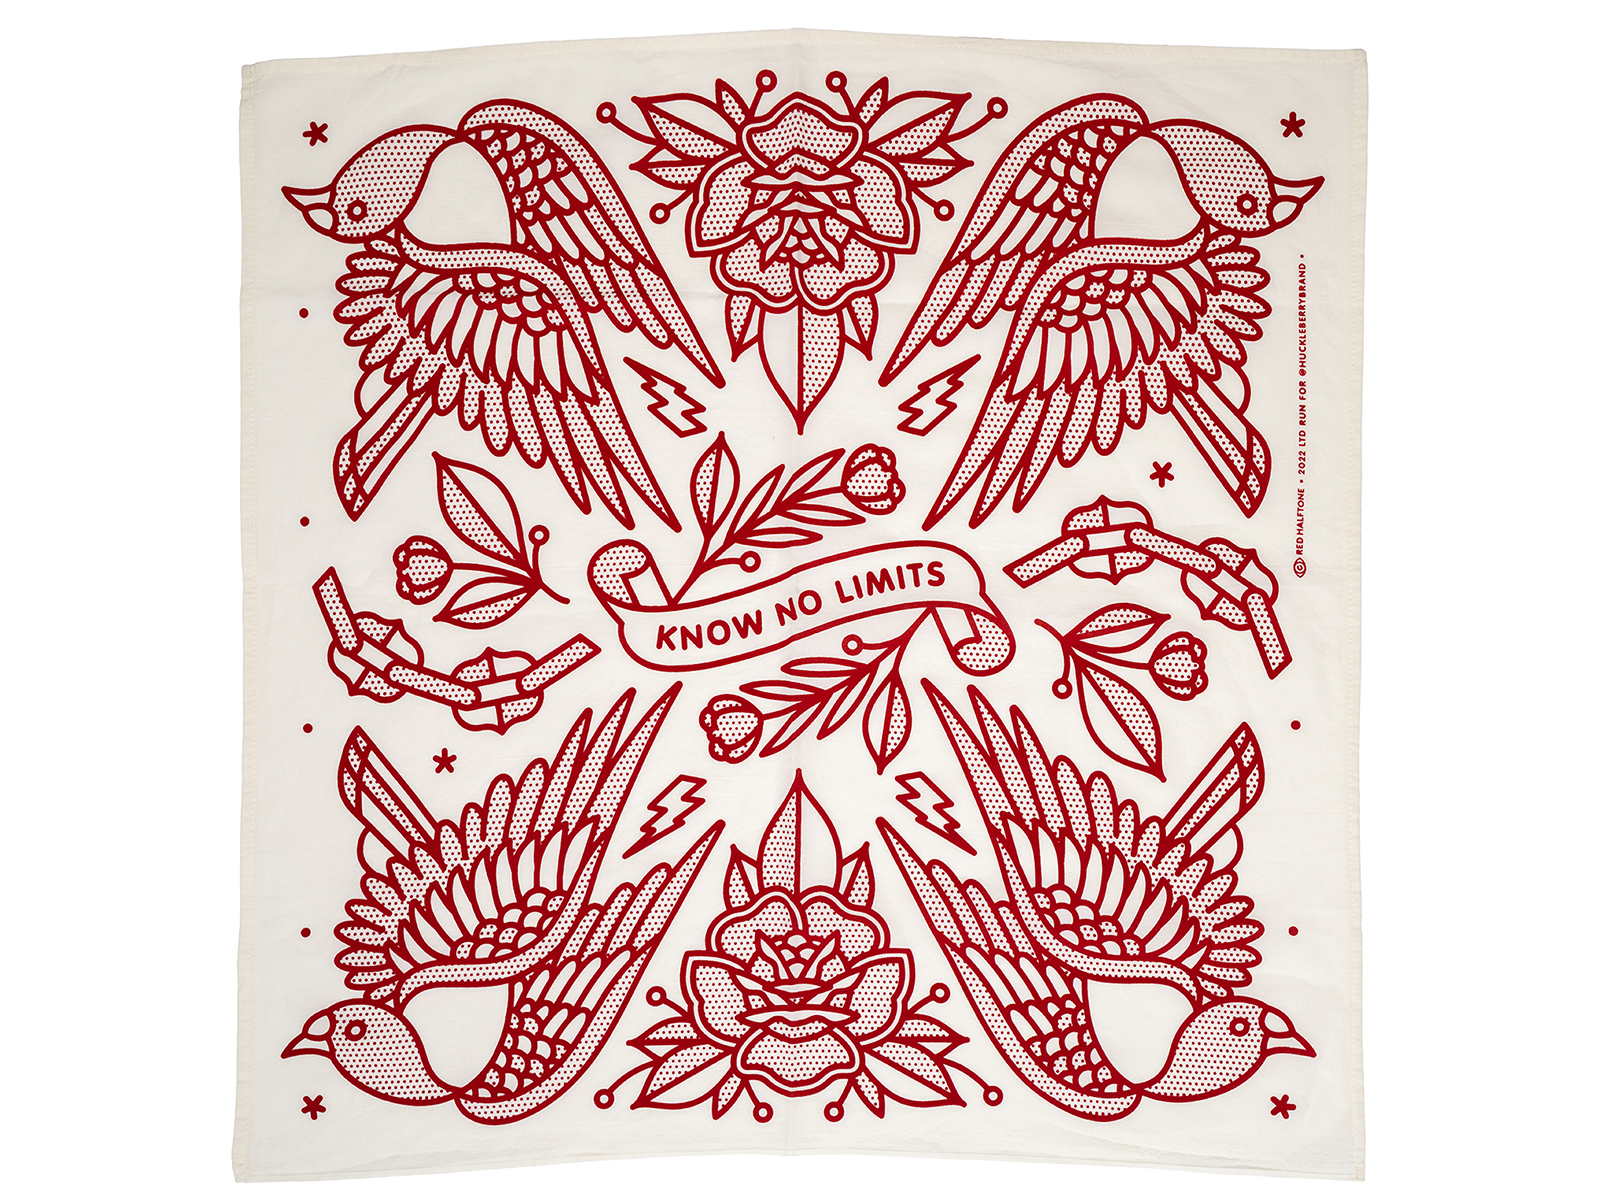 Flattened bandana showing the red on cream colorway